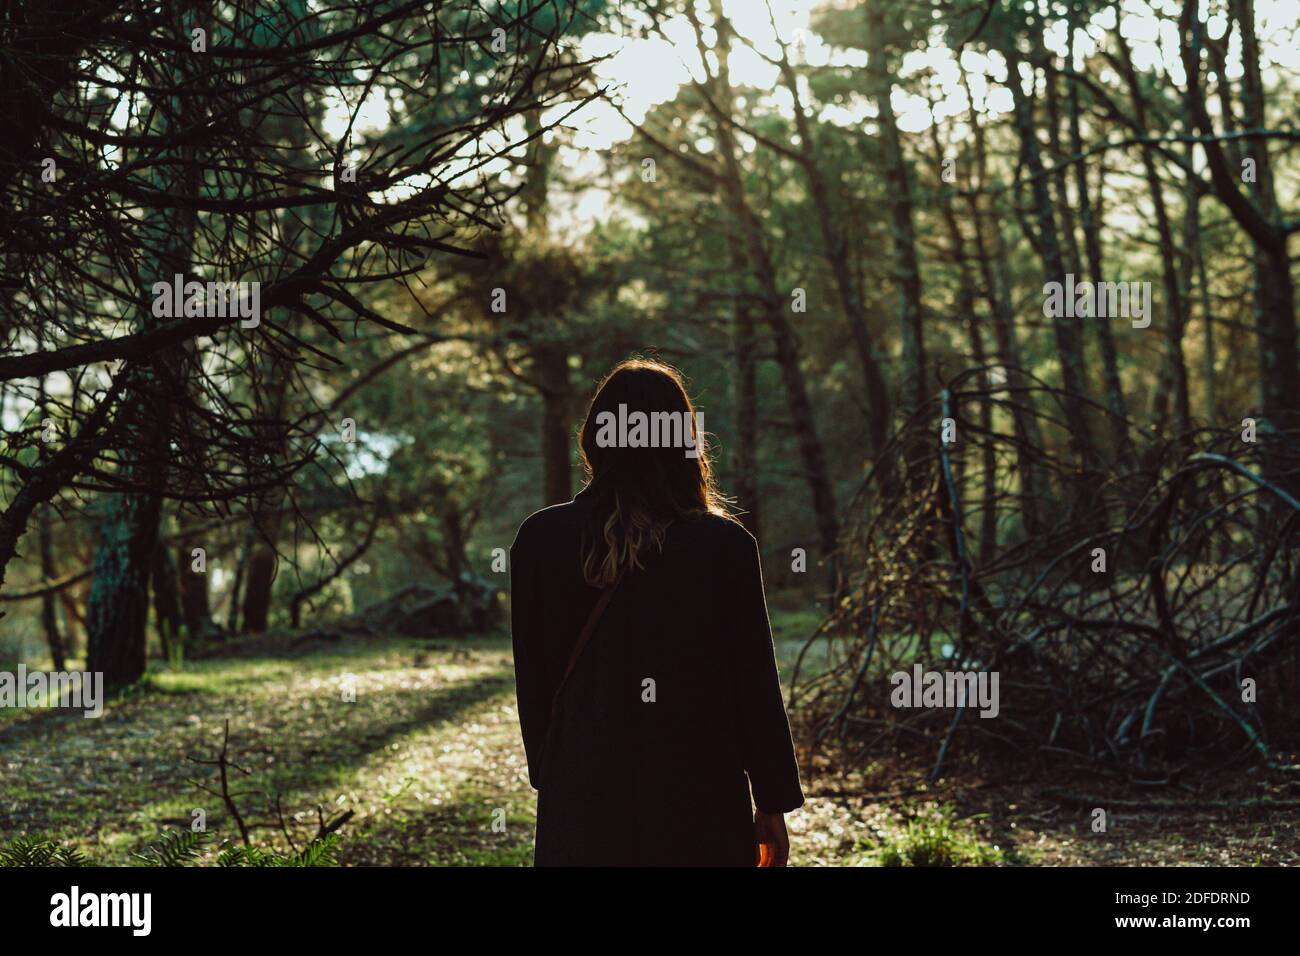 Backlit rear view image of woman standing in forest Stock Photo